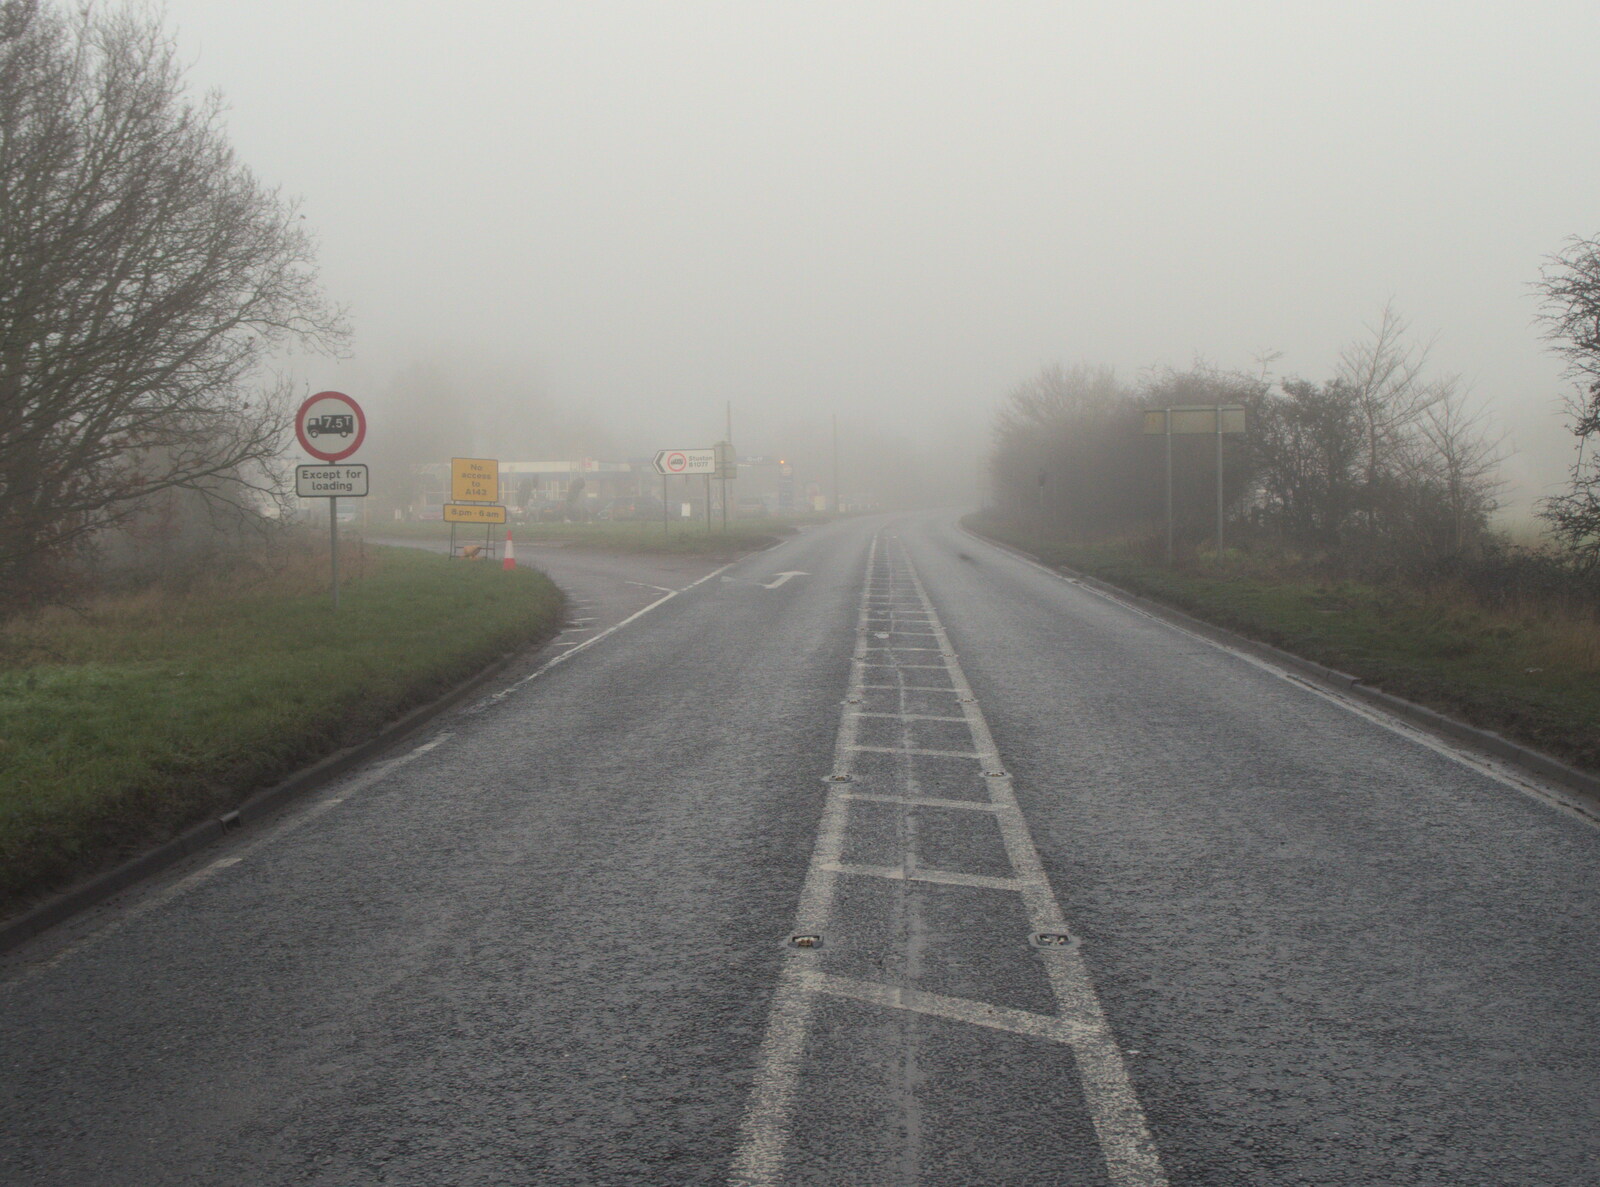 The misty A140 is empty from Fun With Ice in Lockdown, Brome, Suffolk - 10th January 2021